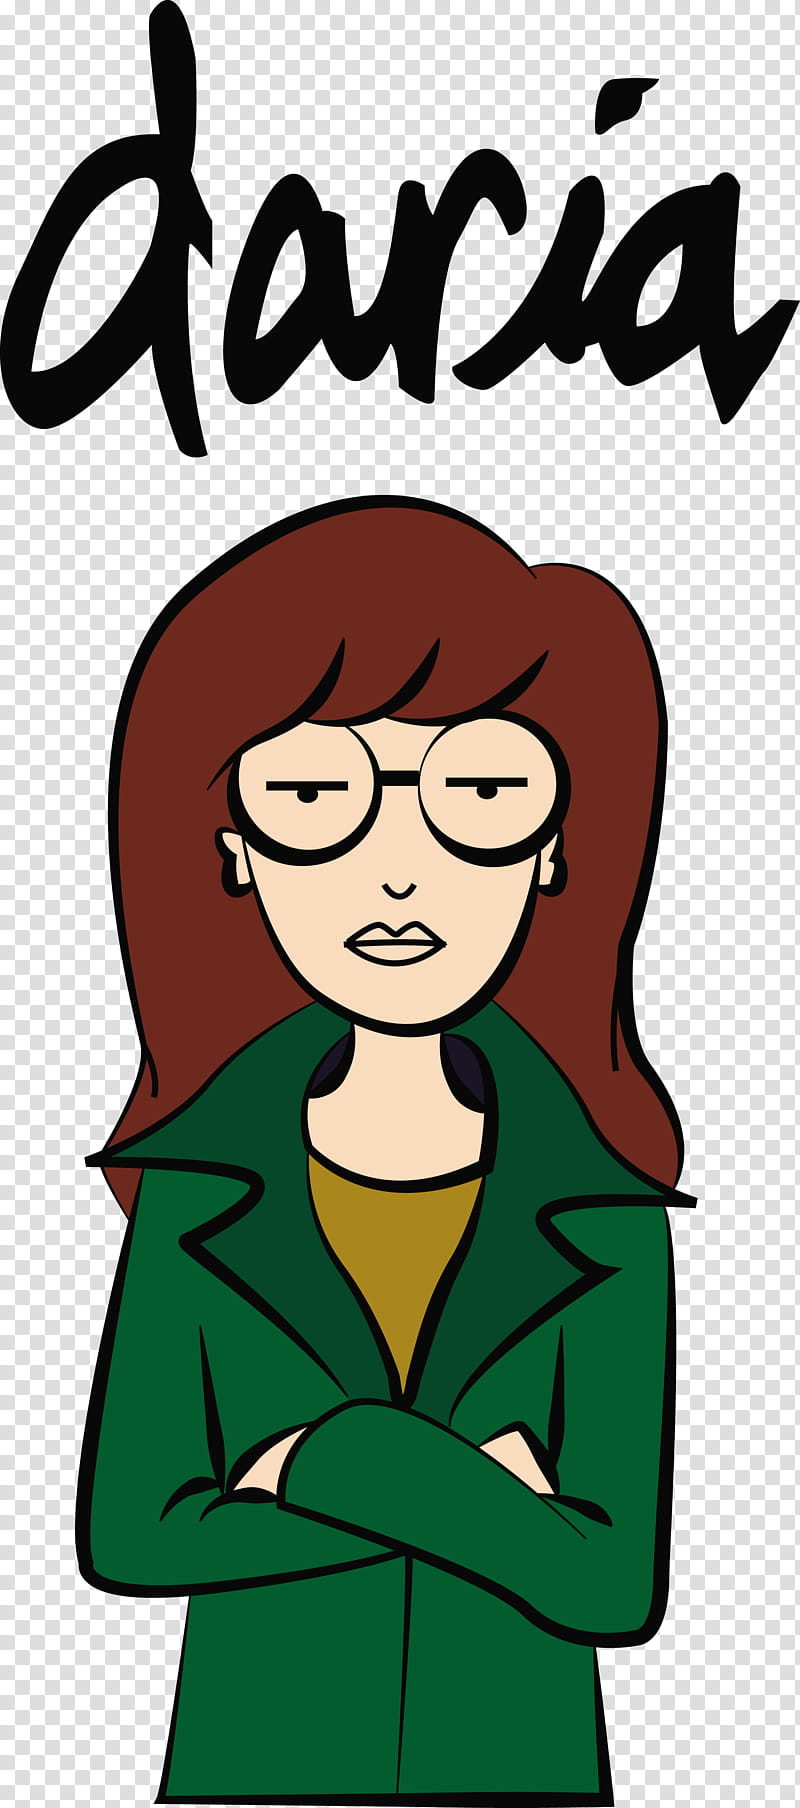 full size Daria, brown-haired female character with text overlay transparent background PNG clipart